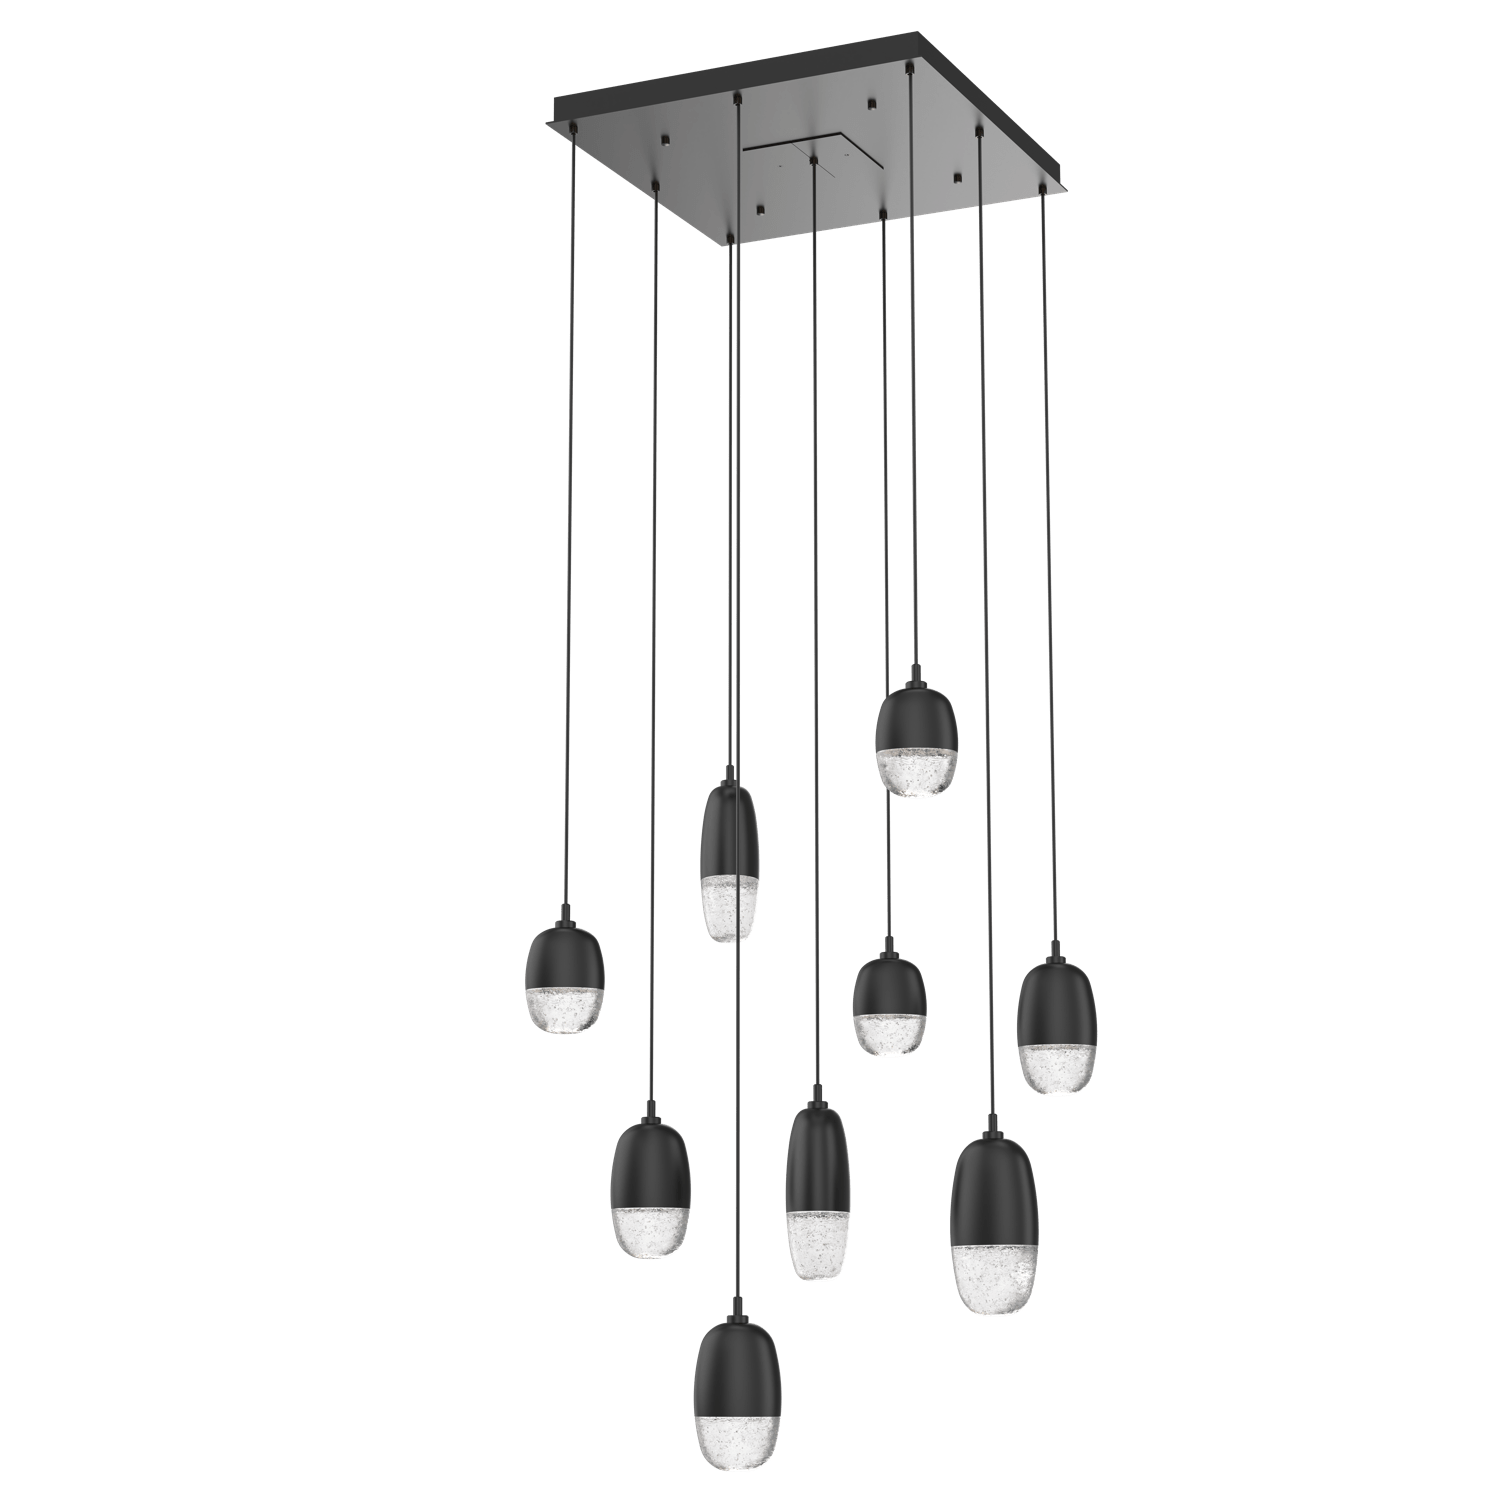 CHB0079-09-MB-Hammerton-Studio-Pebble-9-light-square-pendant-chandelier-with-matte-black-finish-and-clear-cast-glass-shades-and-LED-lamping